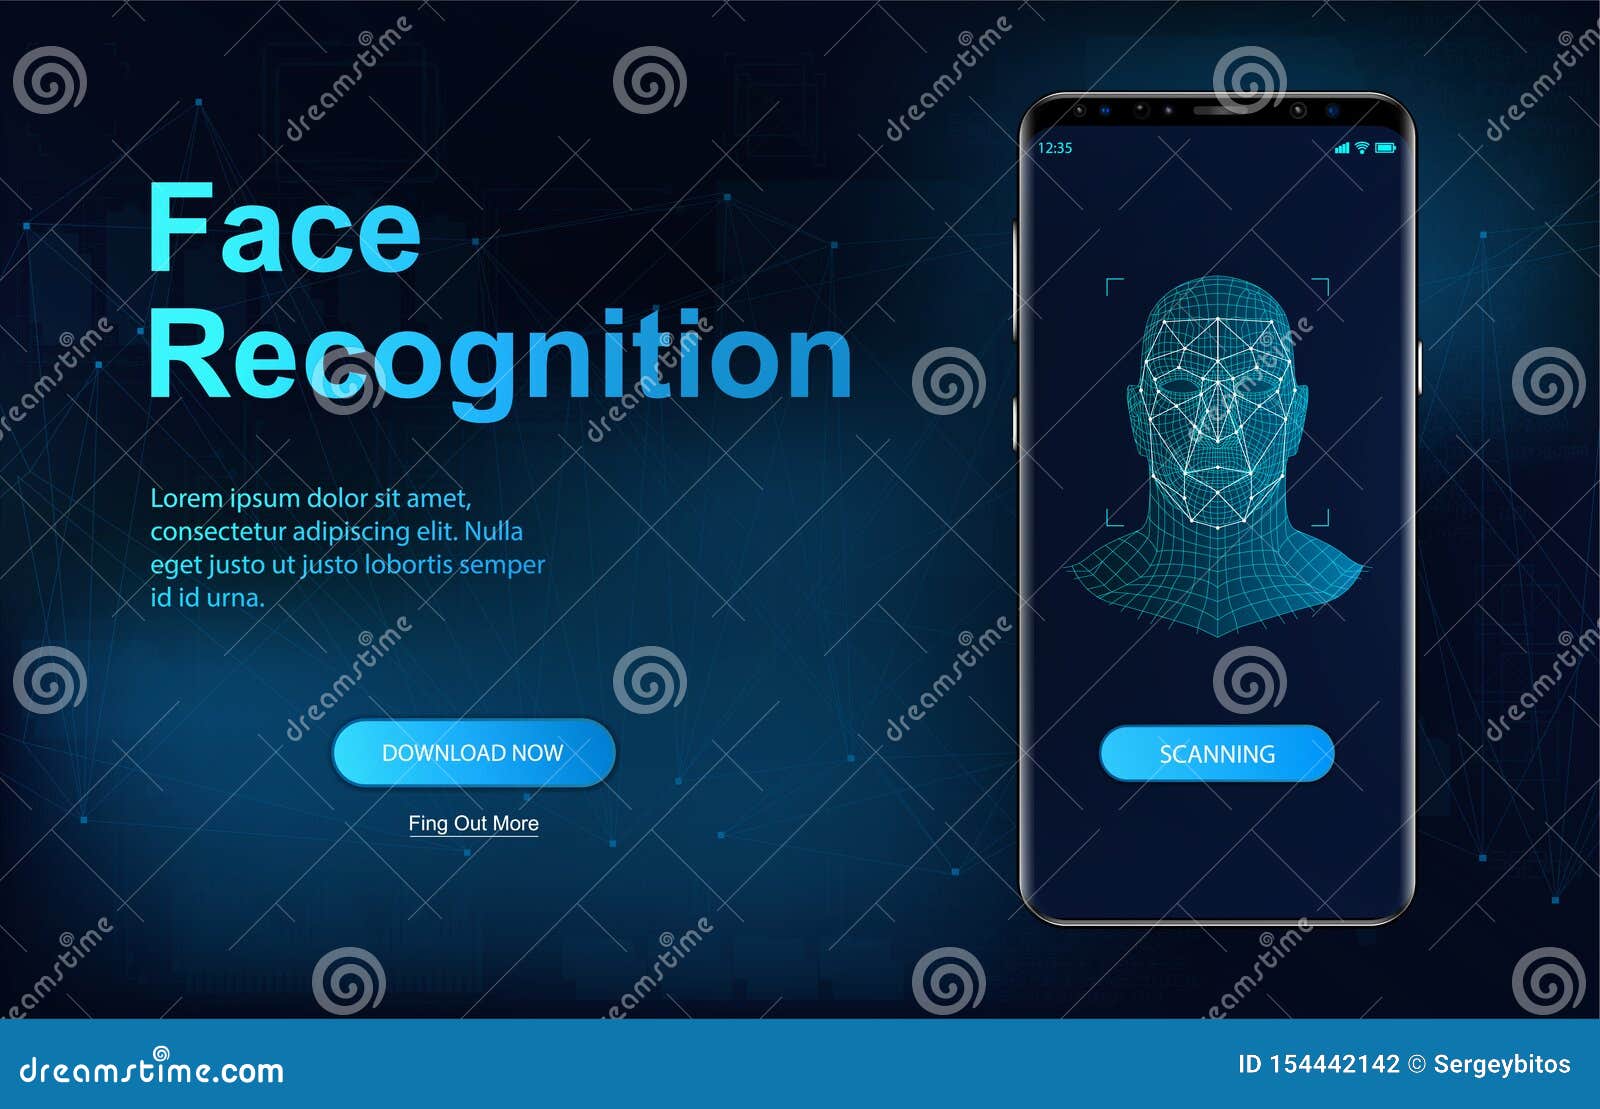 biometric face recognition on smartphone